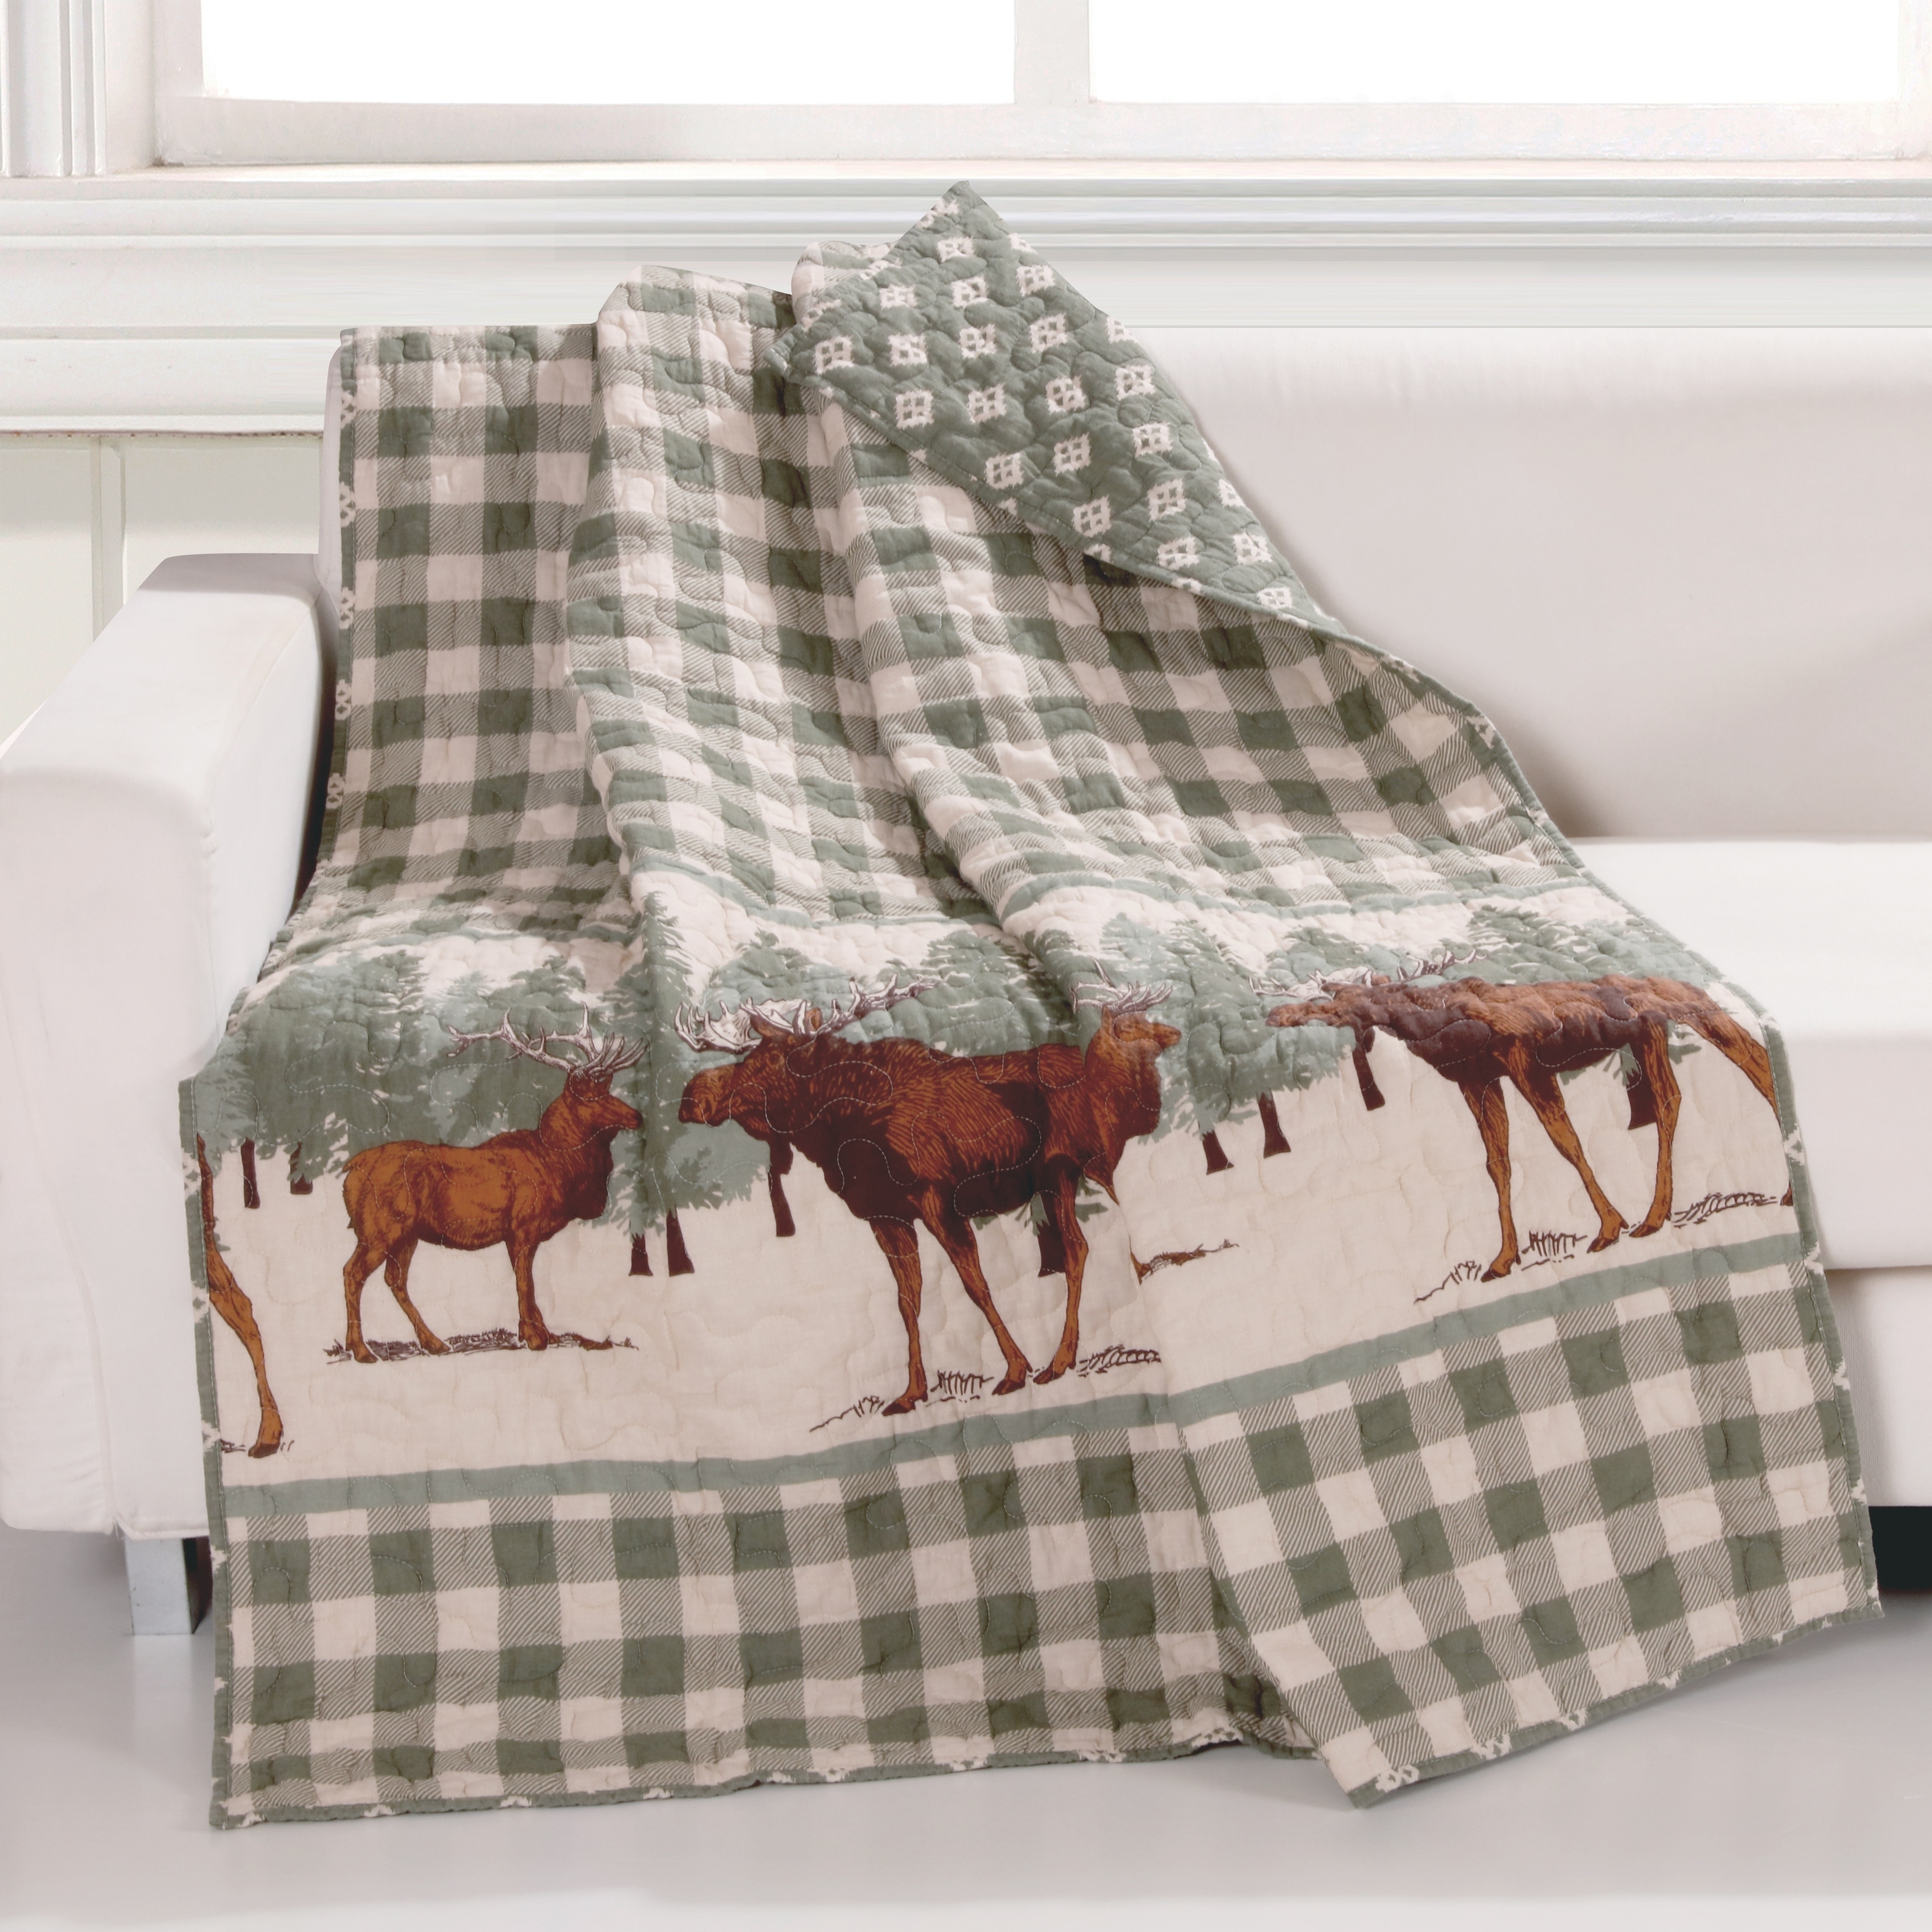 Greenland Home Fashions Greenland Home Moose Creek Quilted Throw Blanket, 50x60-inch - image 2 of 5